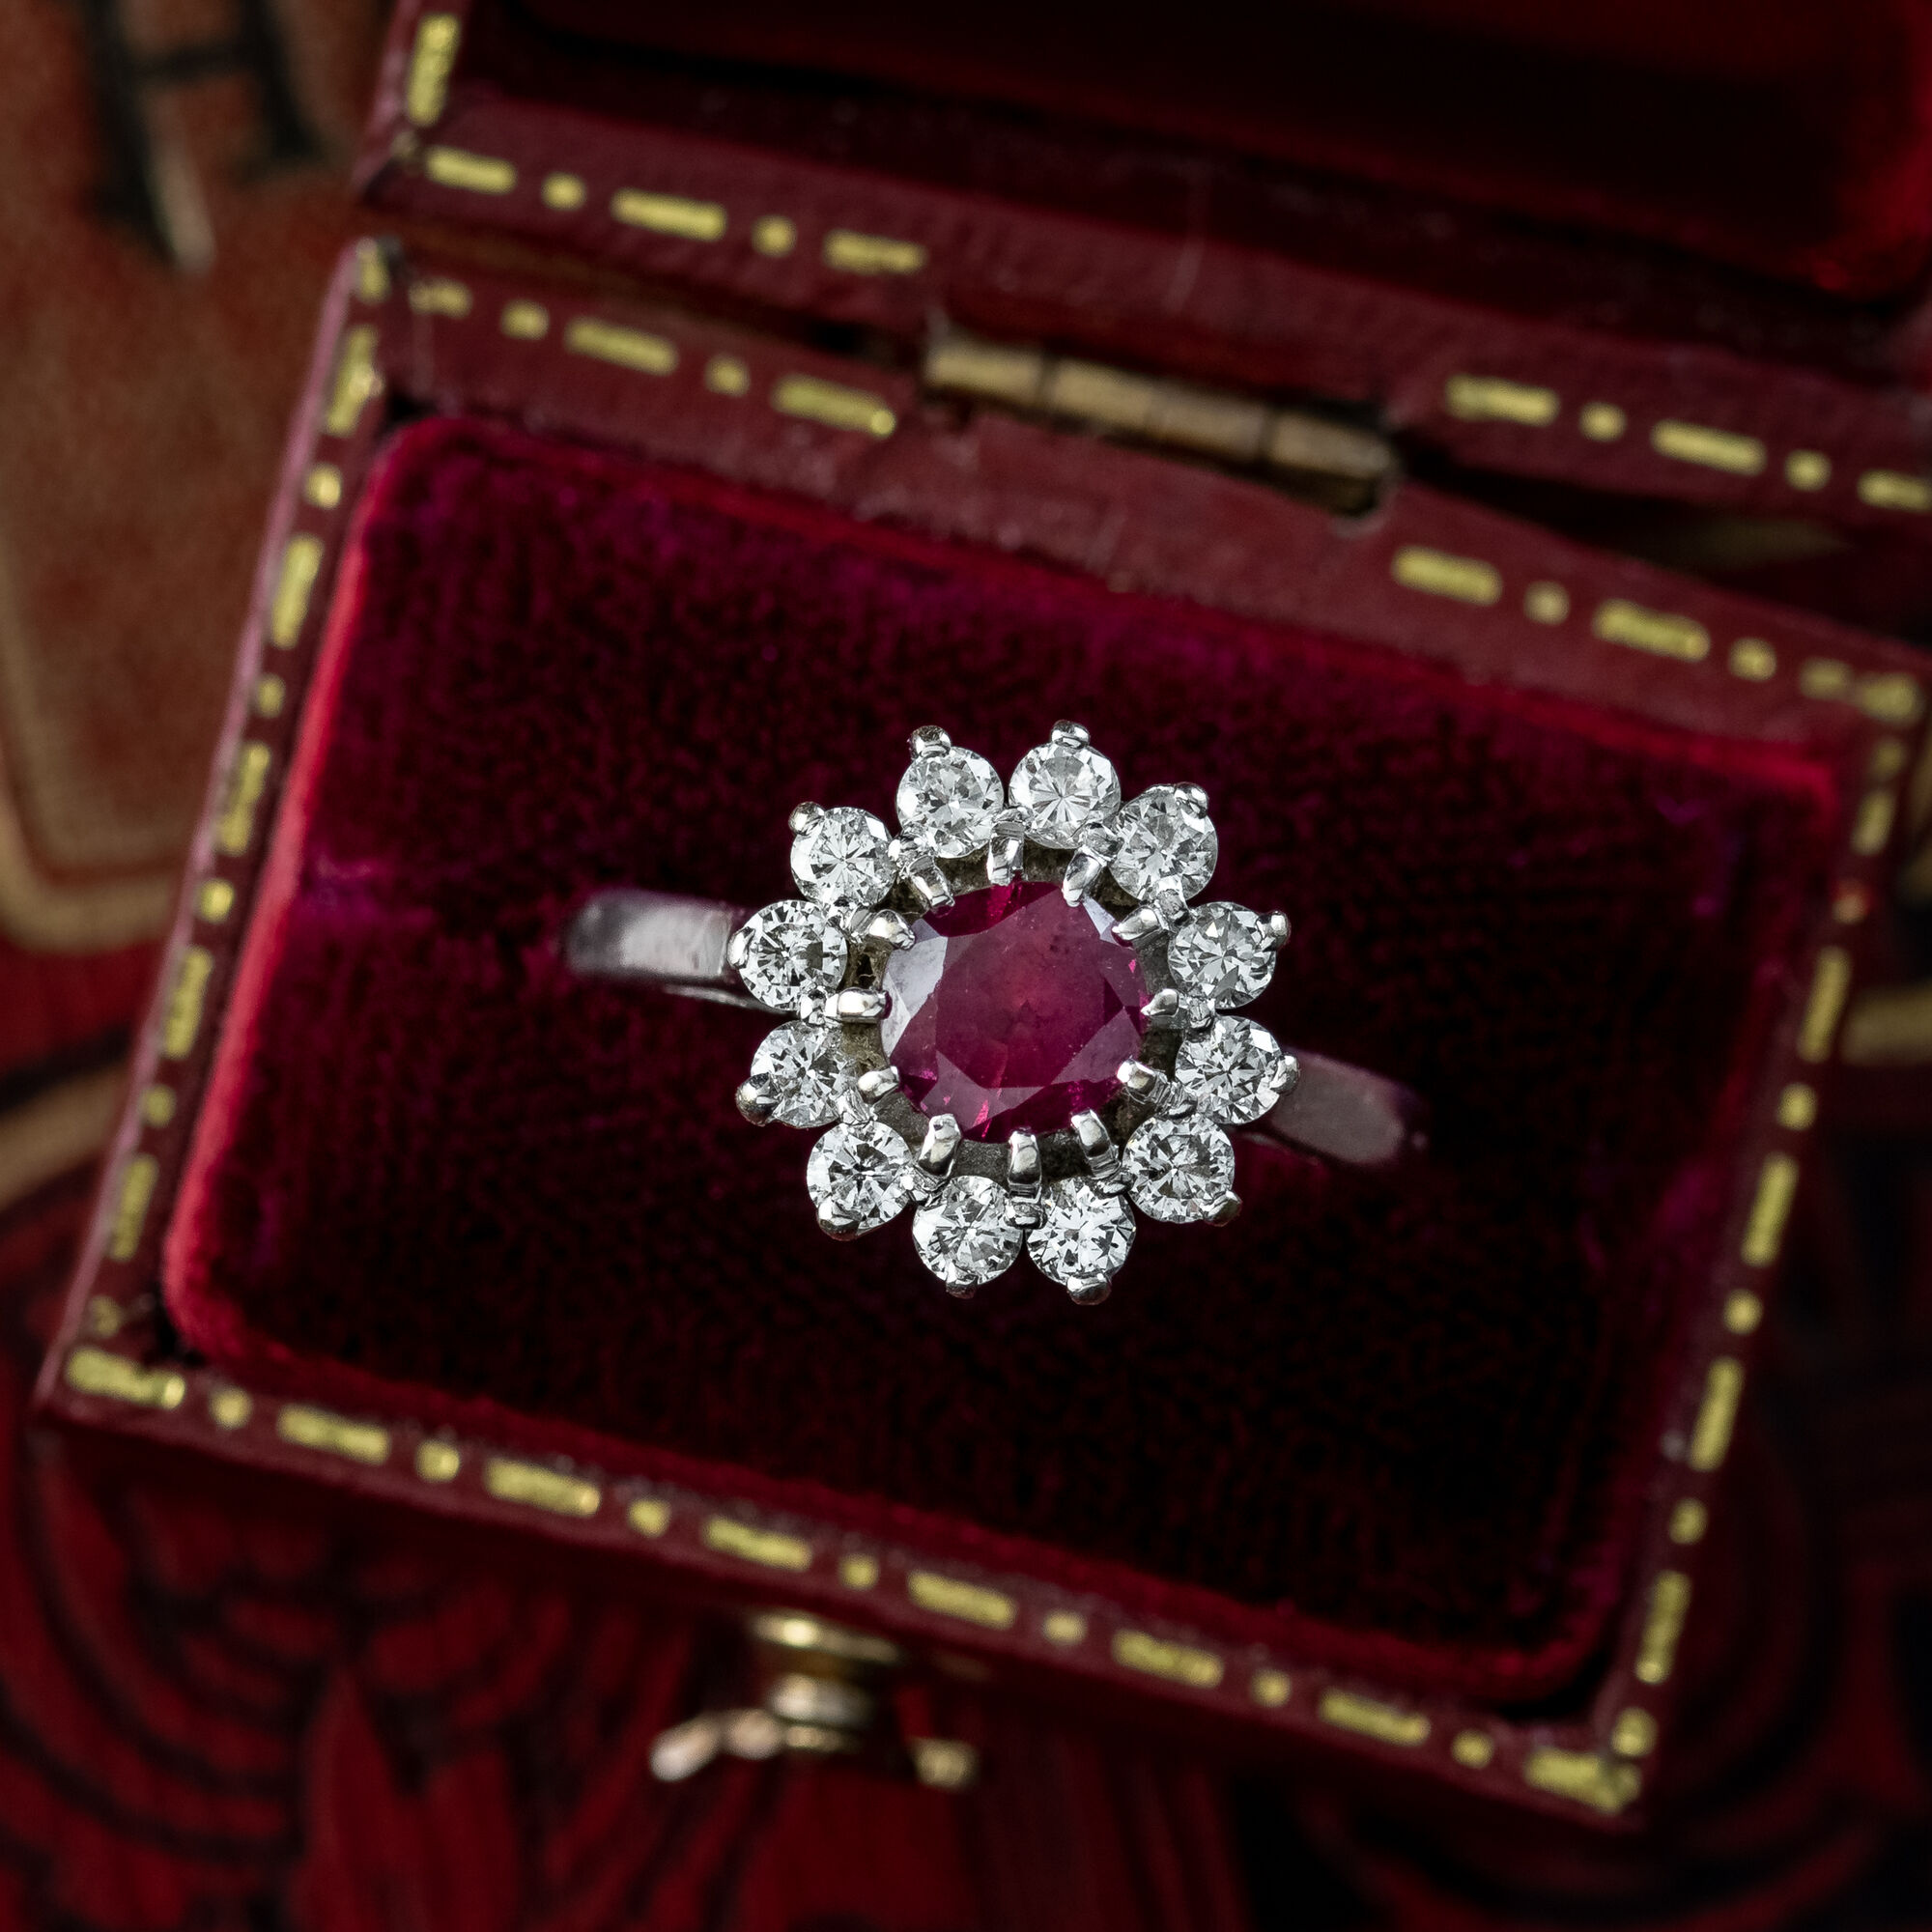 Vintage Ruby Diamond Daisy Cluster Ring 1ct Ruby Dated 1976